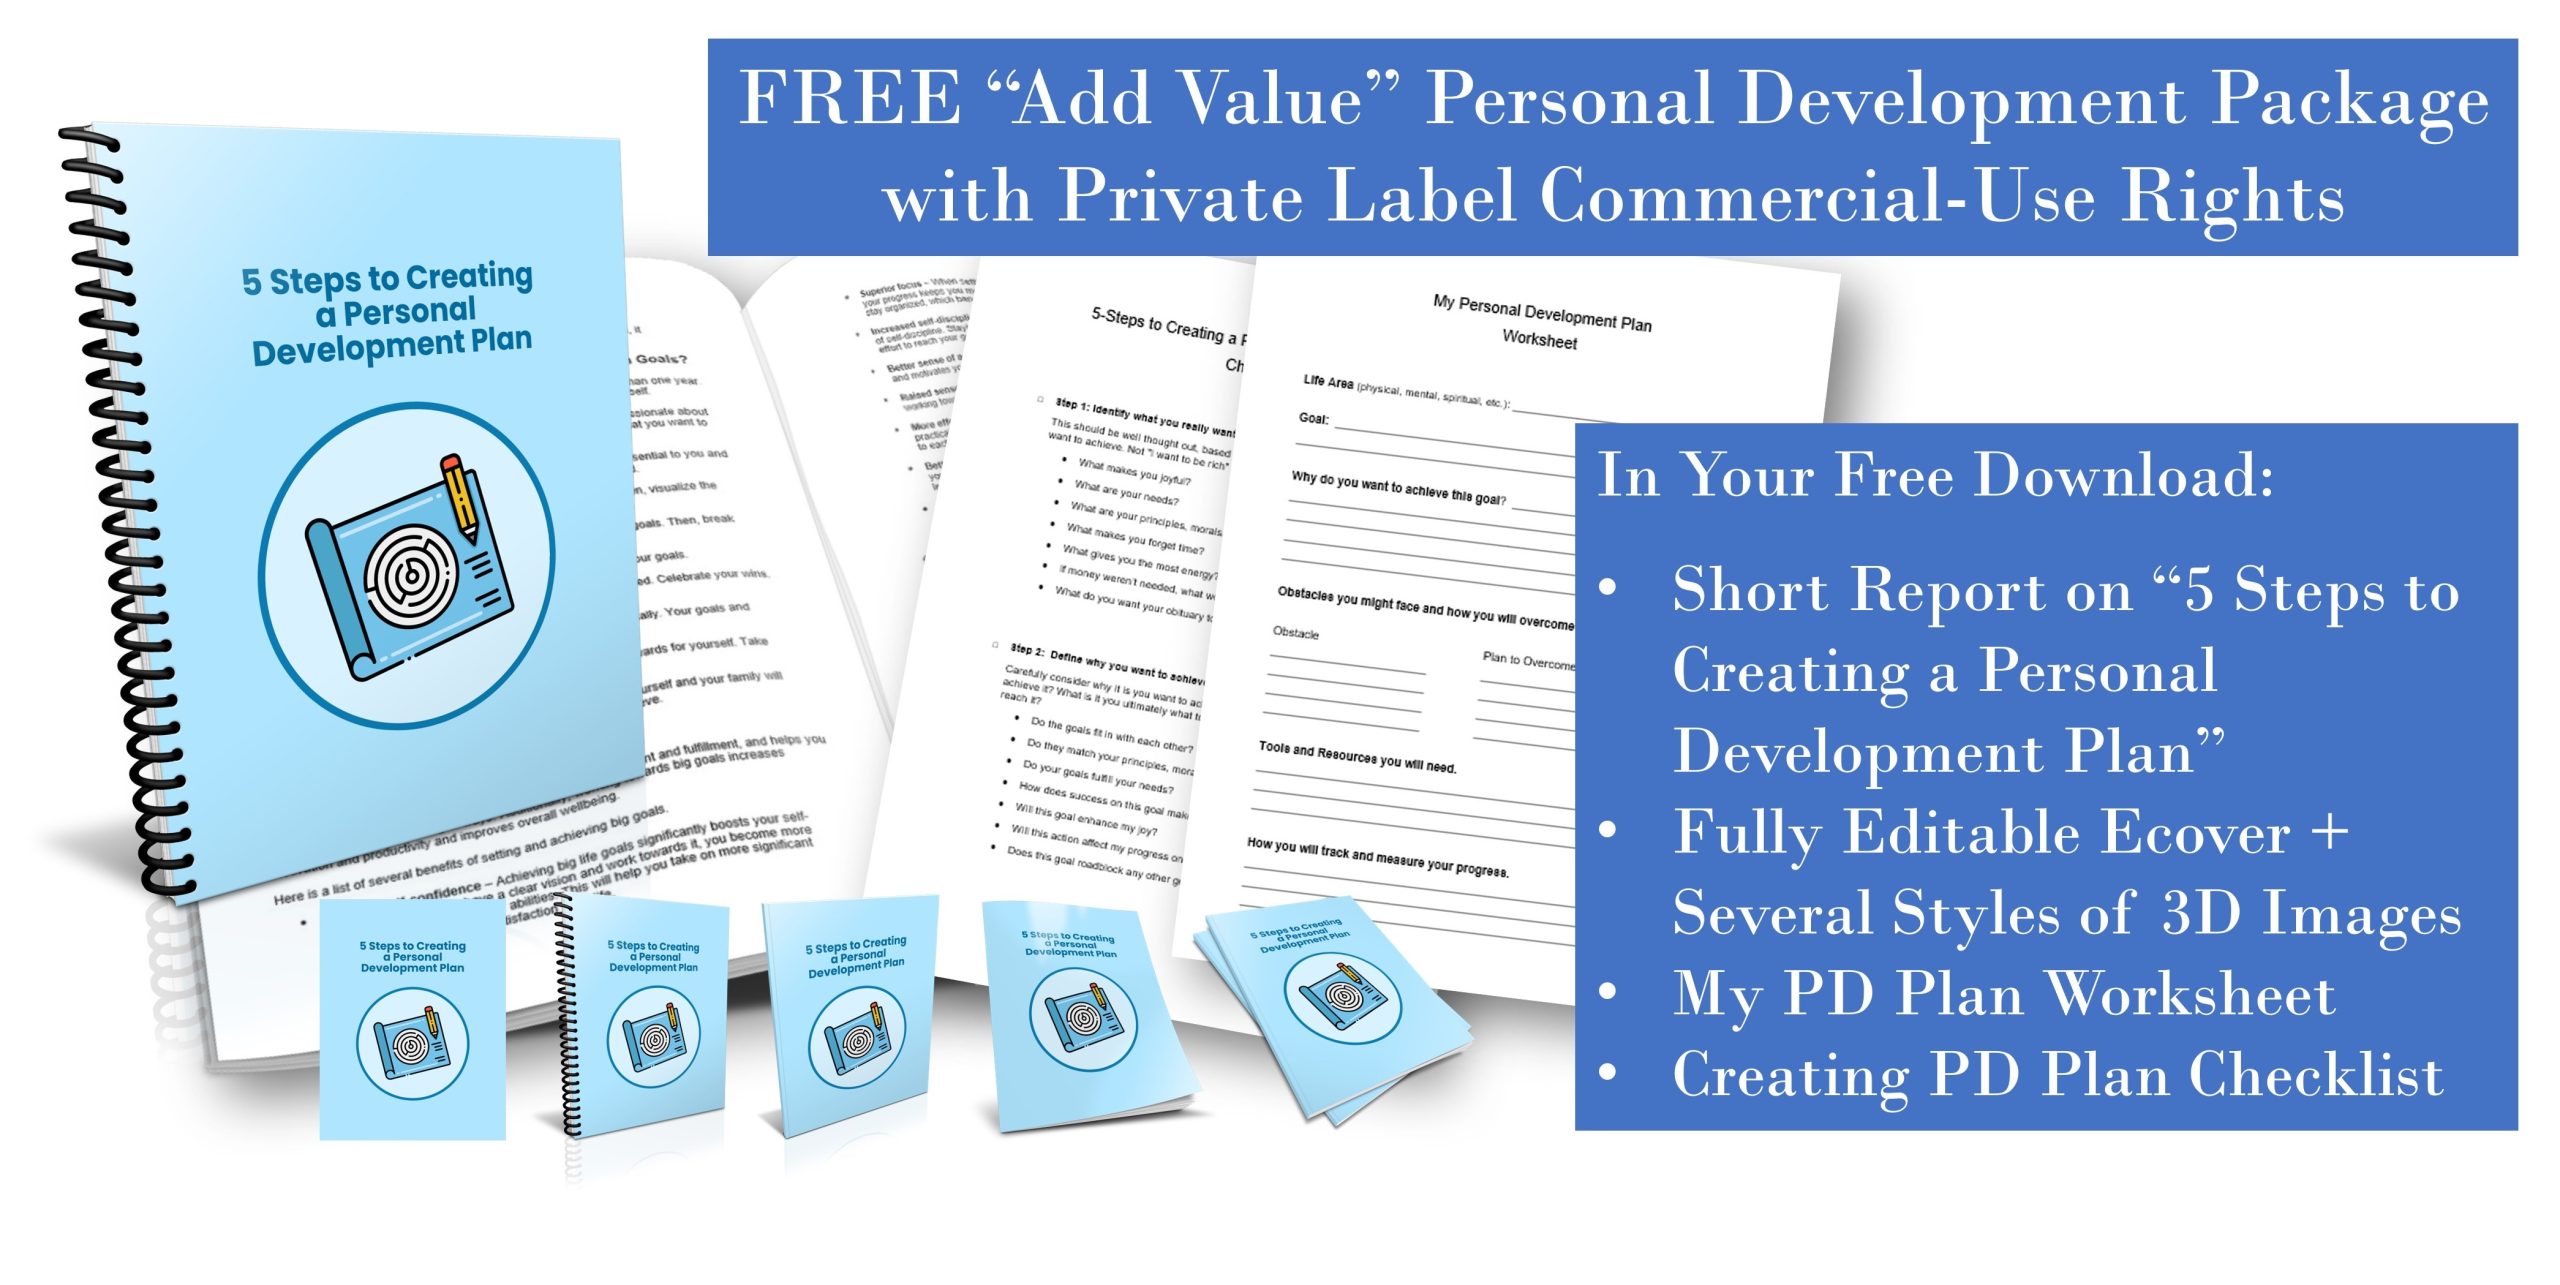 Free Add Value Personal Development Pack